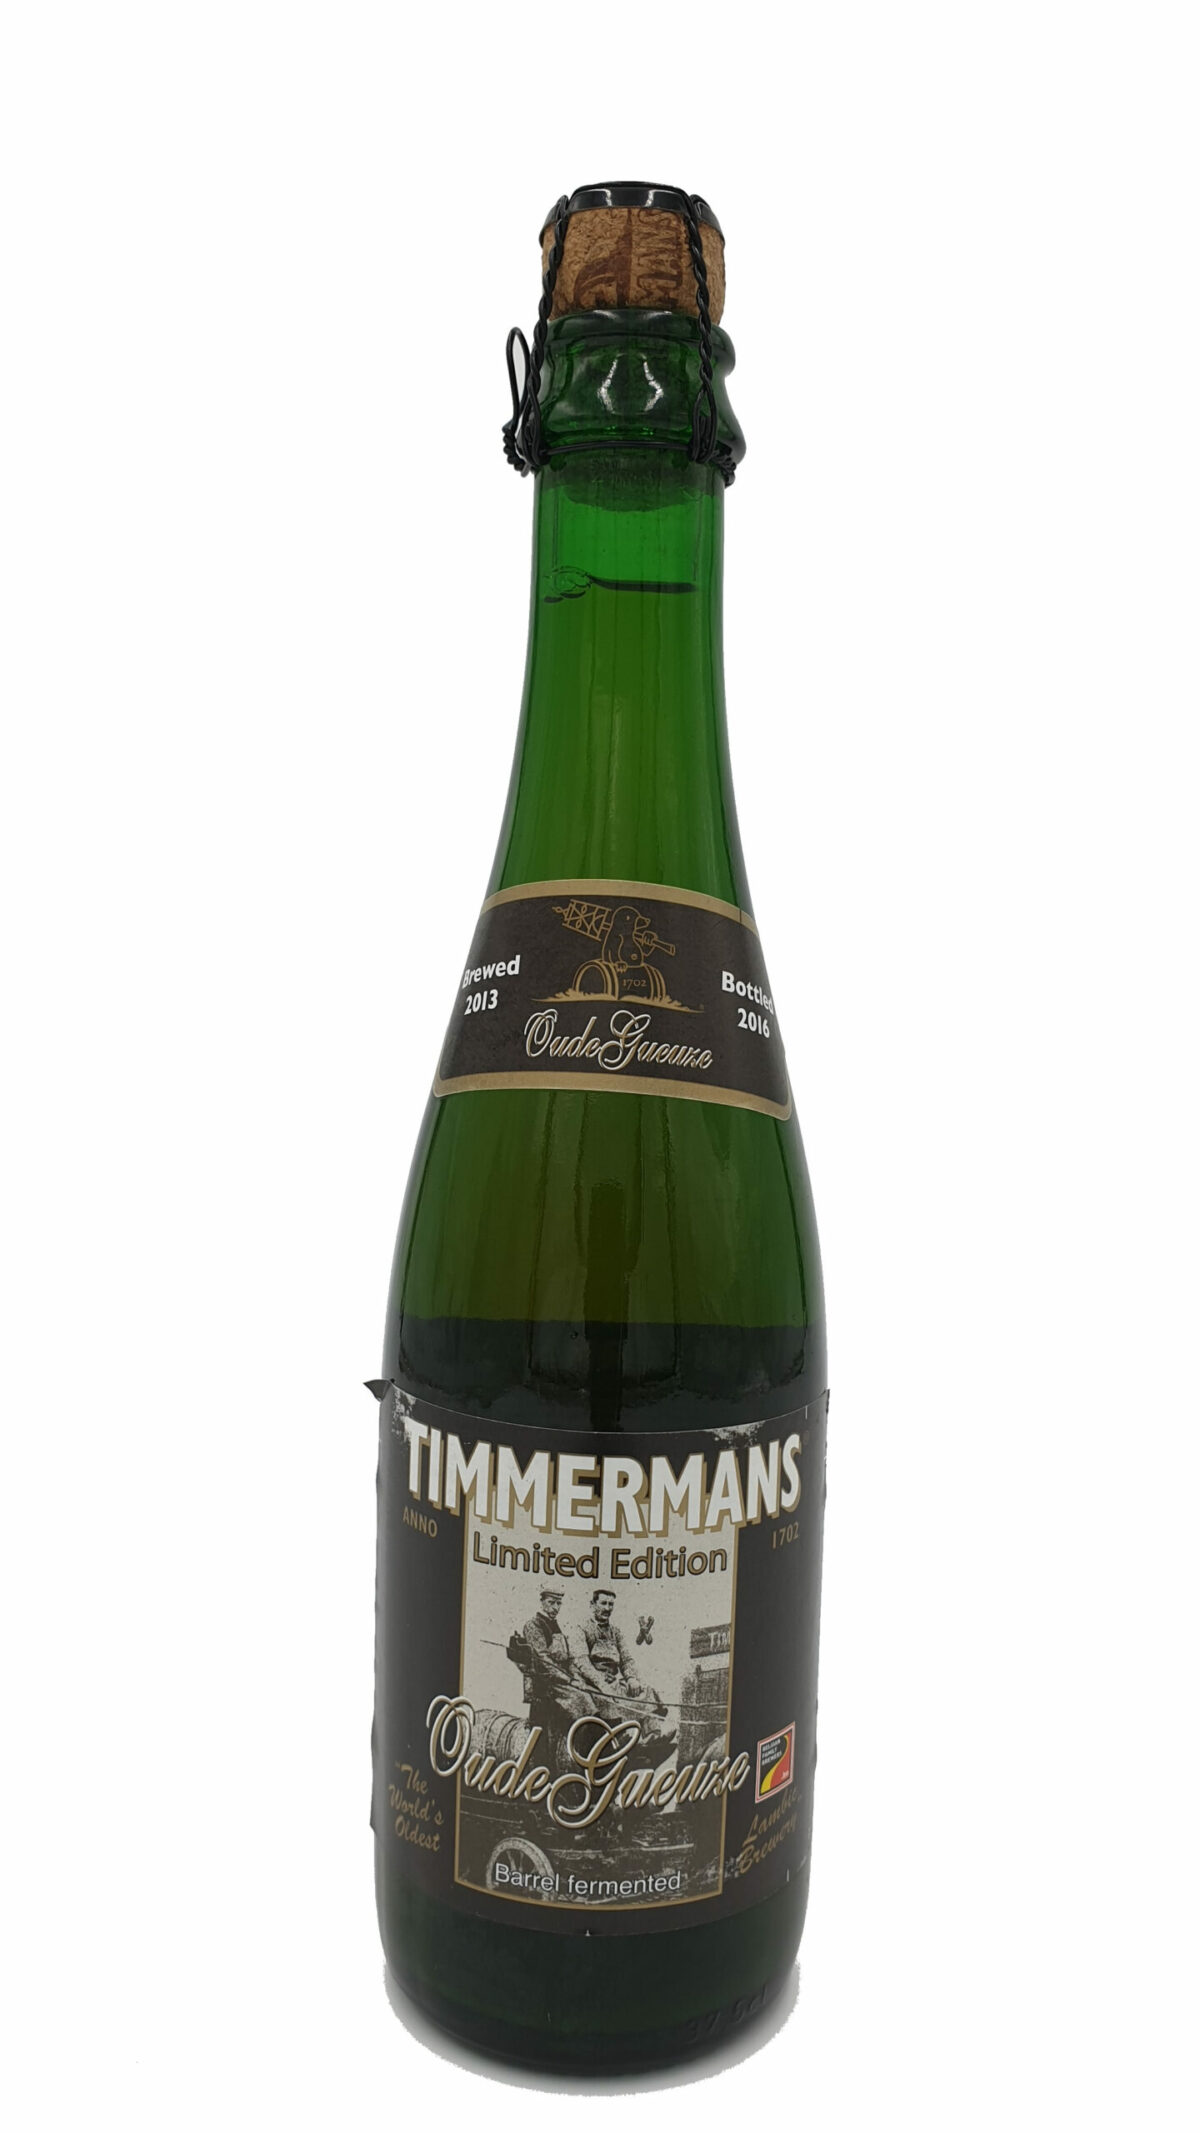 timmermans oude gueuze old label